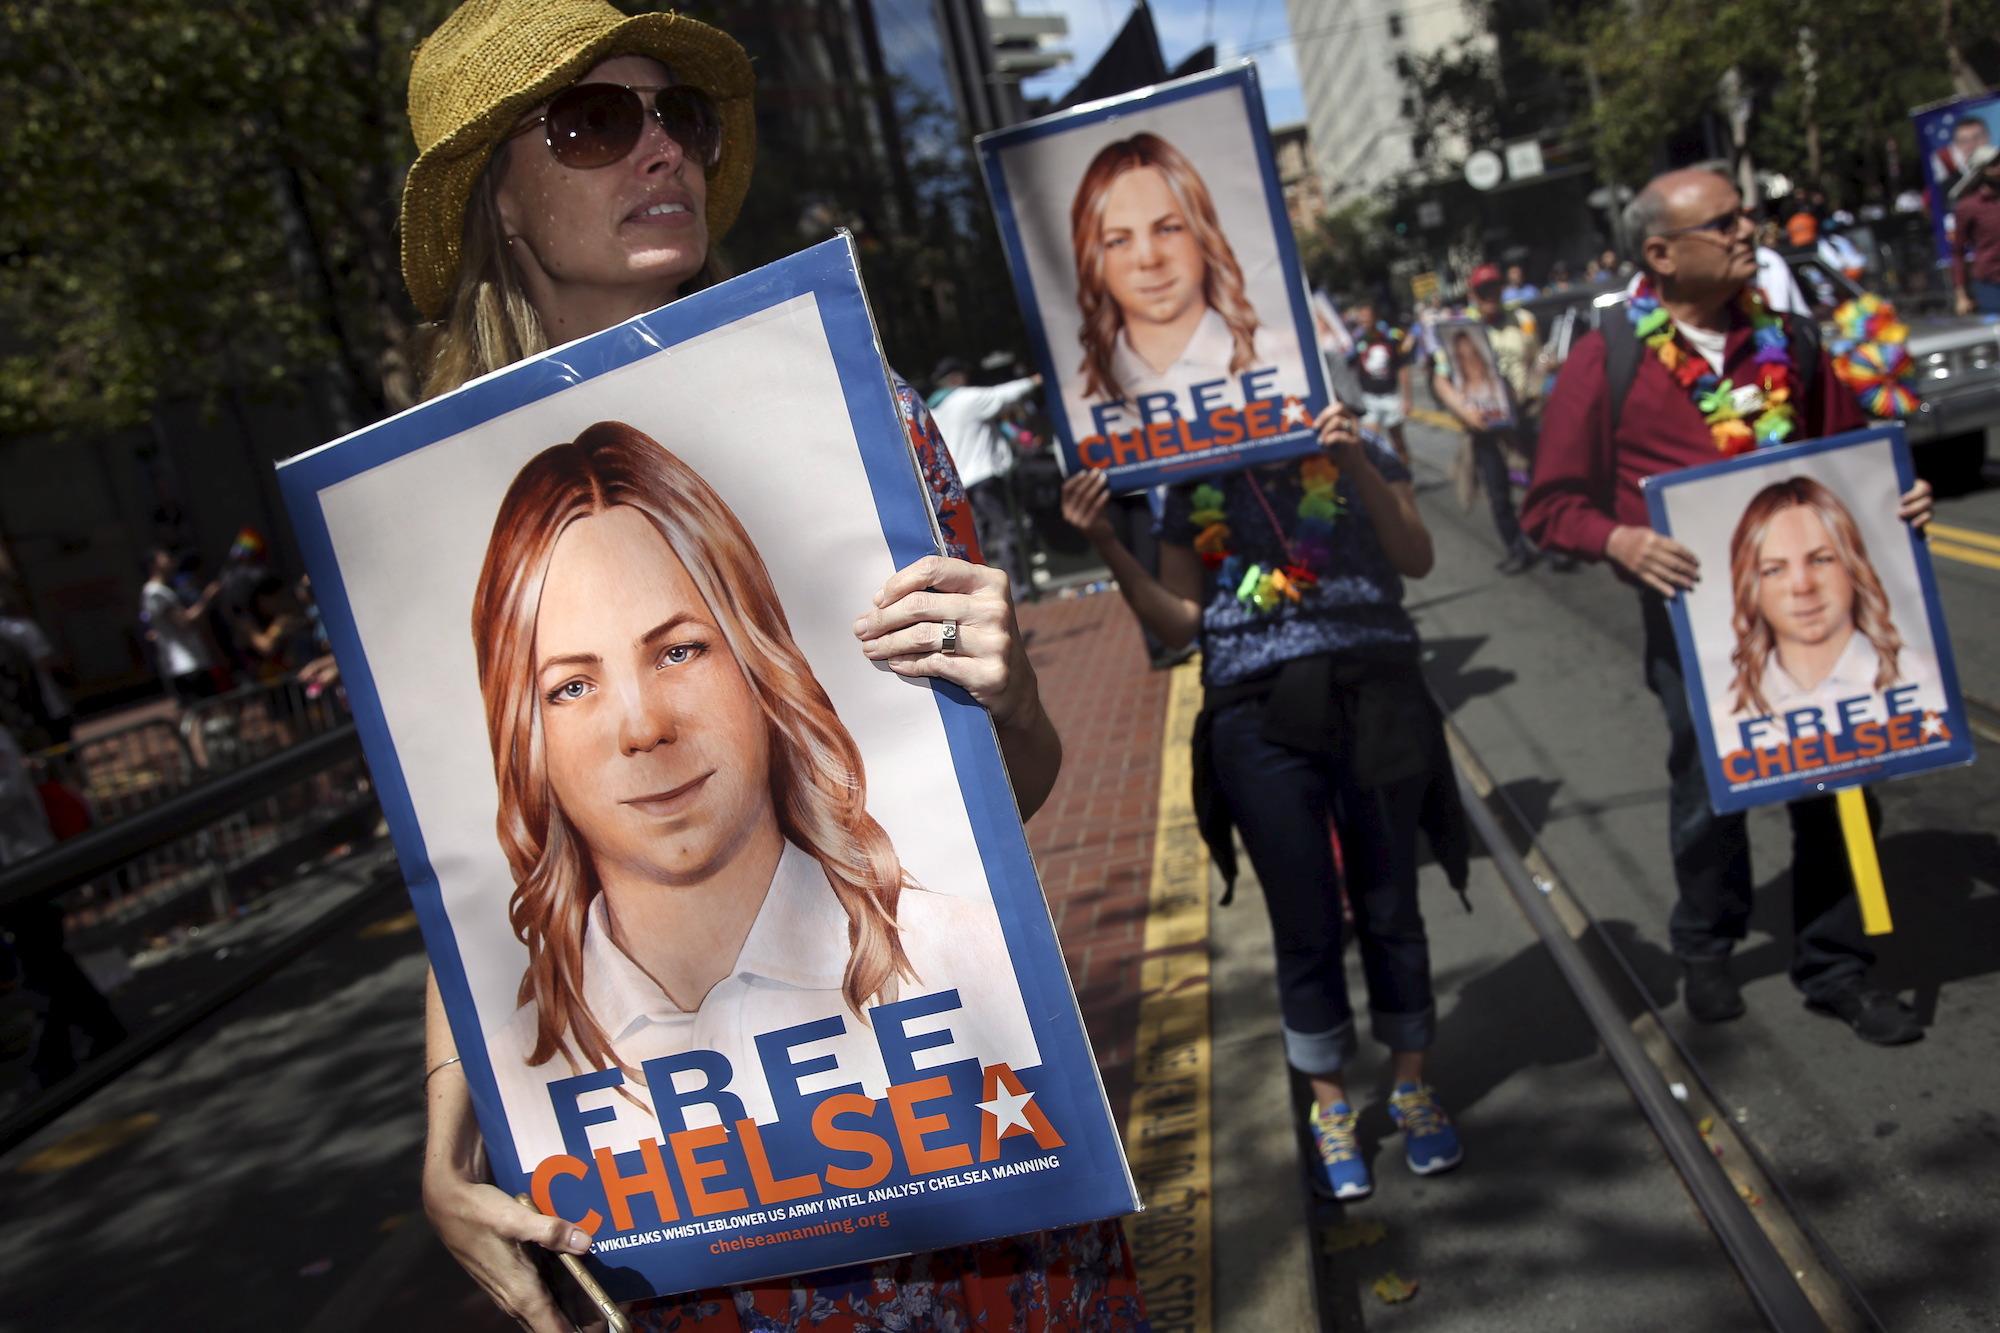 Protesters had been calling for the release of the Wikileaks whistleblower since her arrest